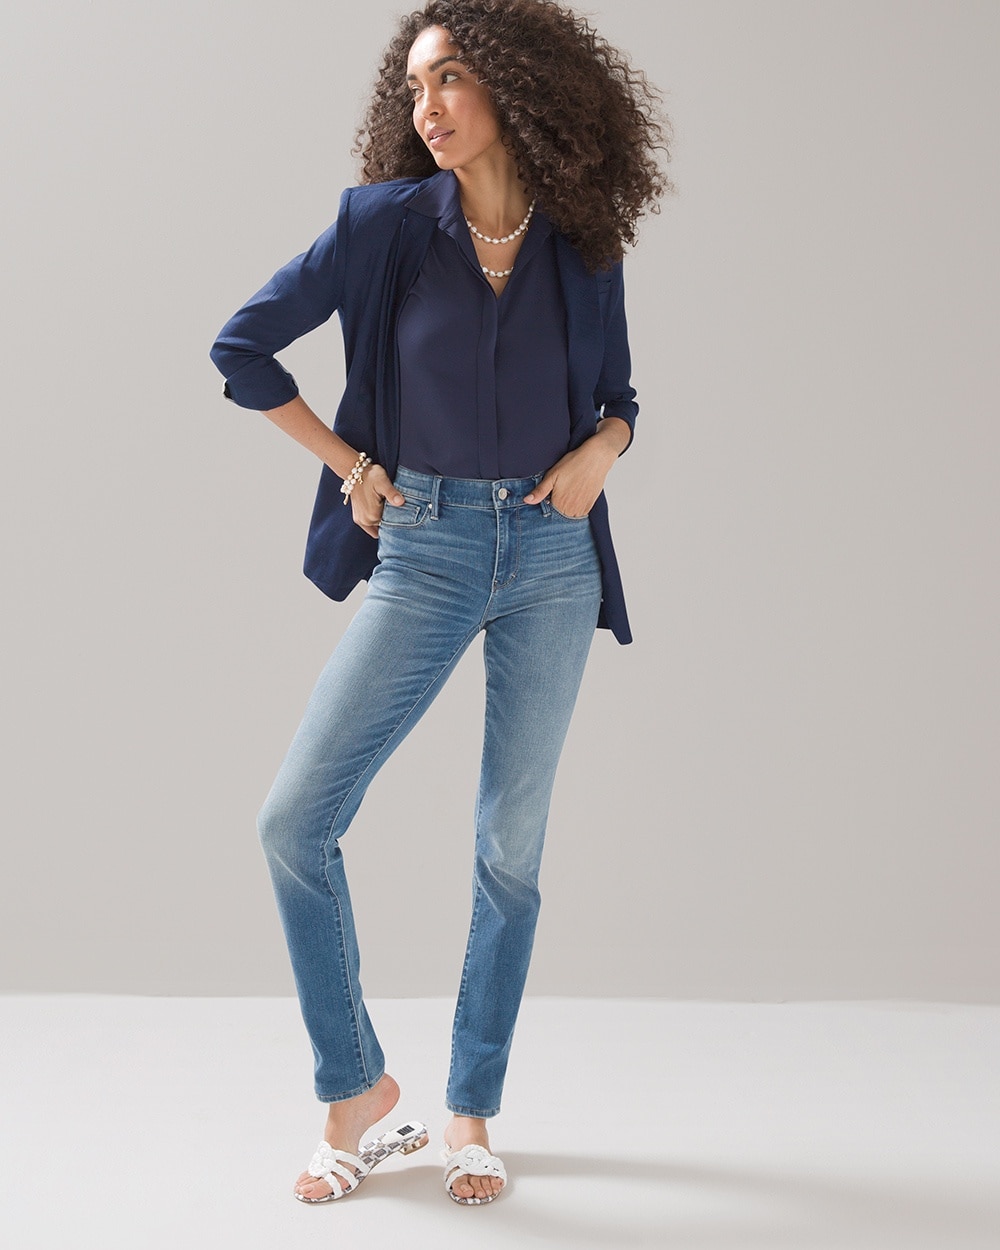 Mid-Rise Everyday Soft Denim\u2122 Slim Jeans video preview image, click to start video